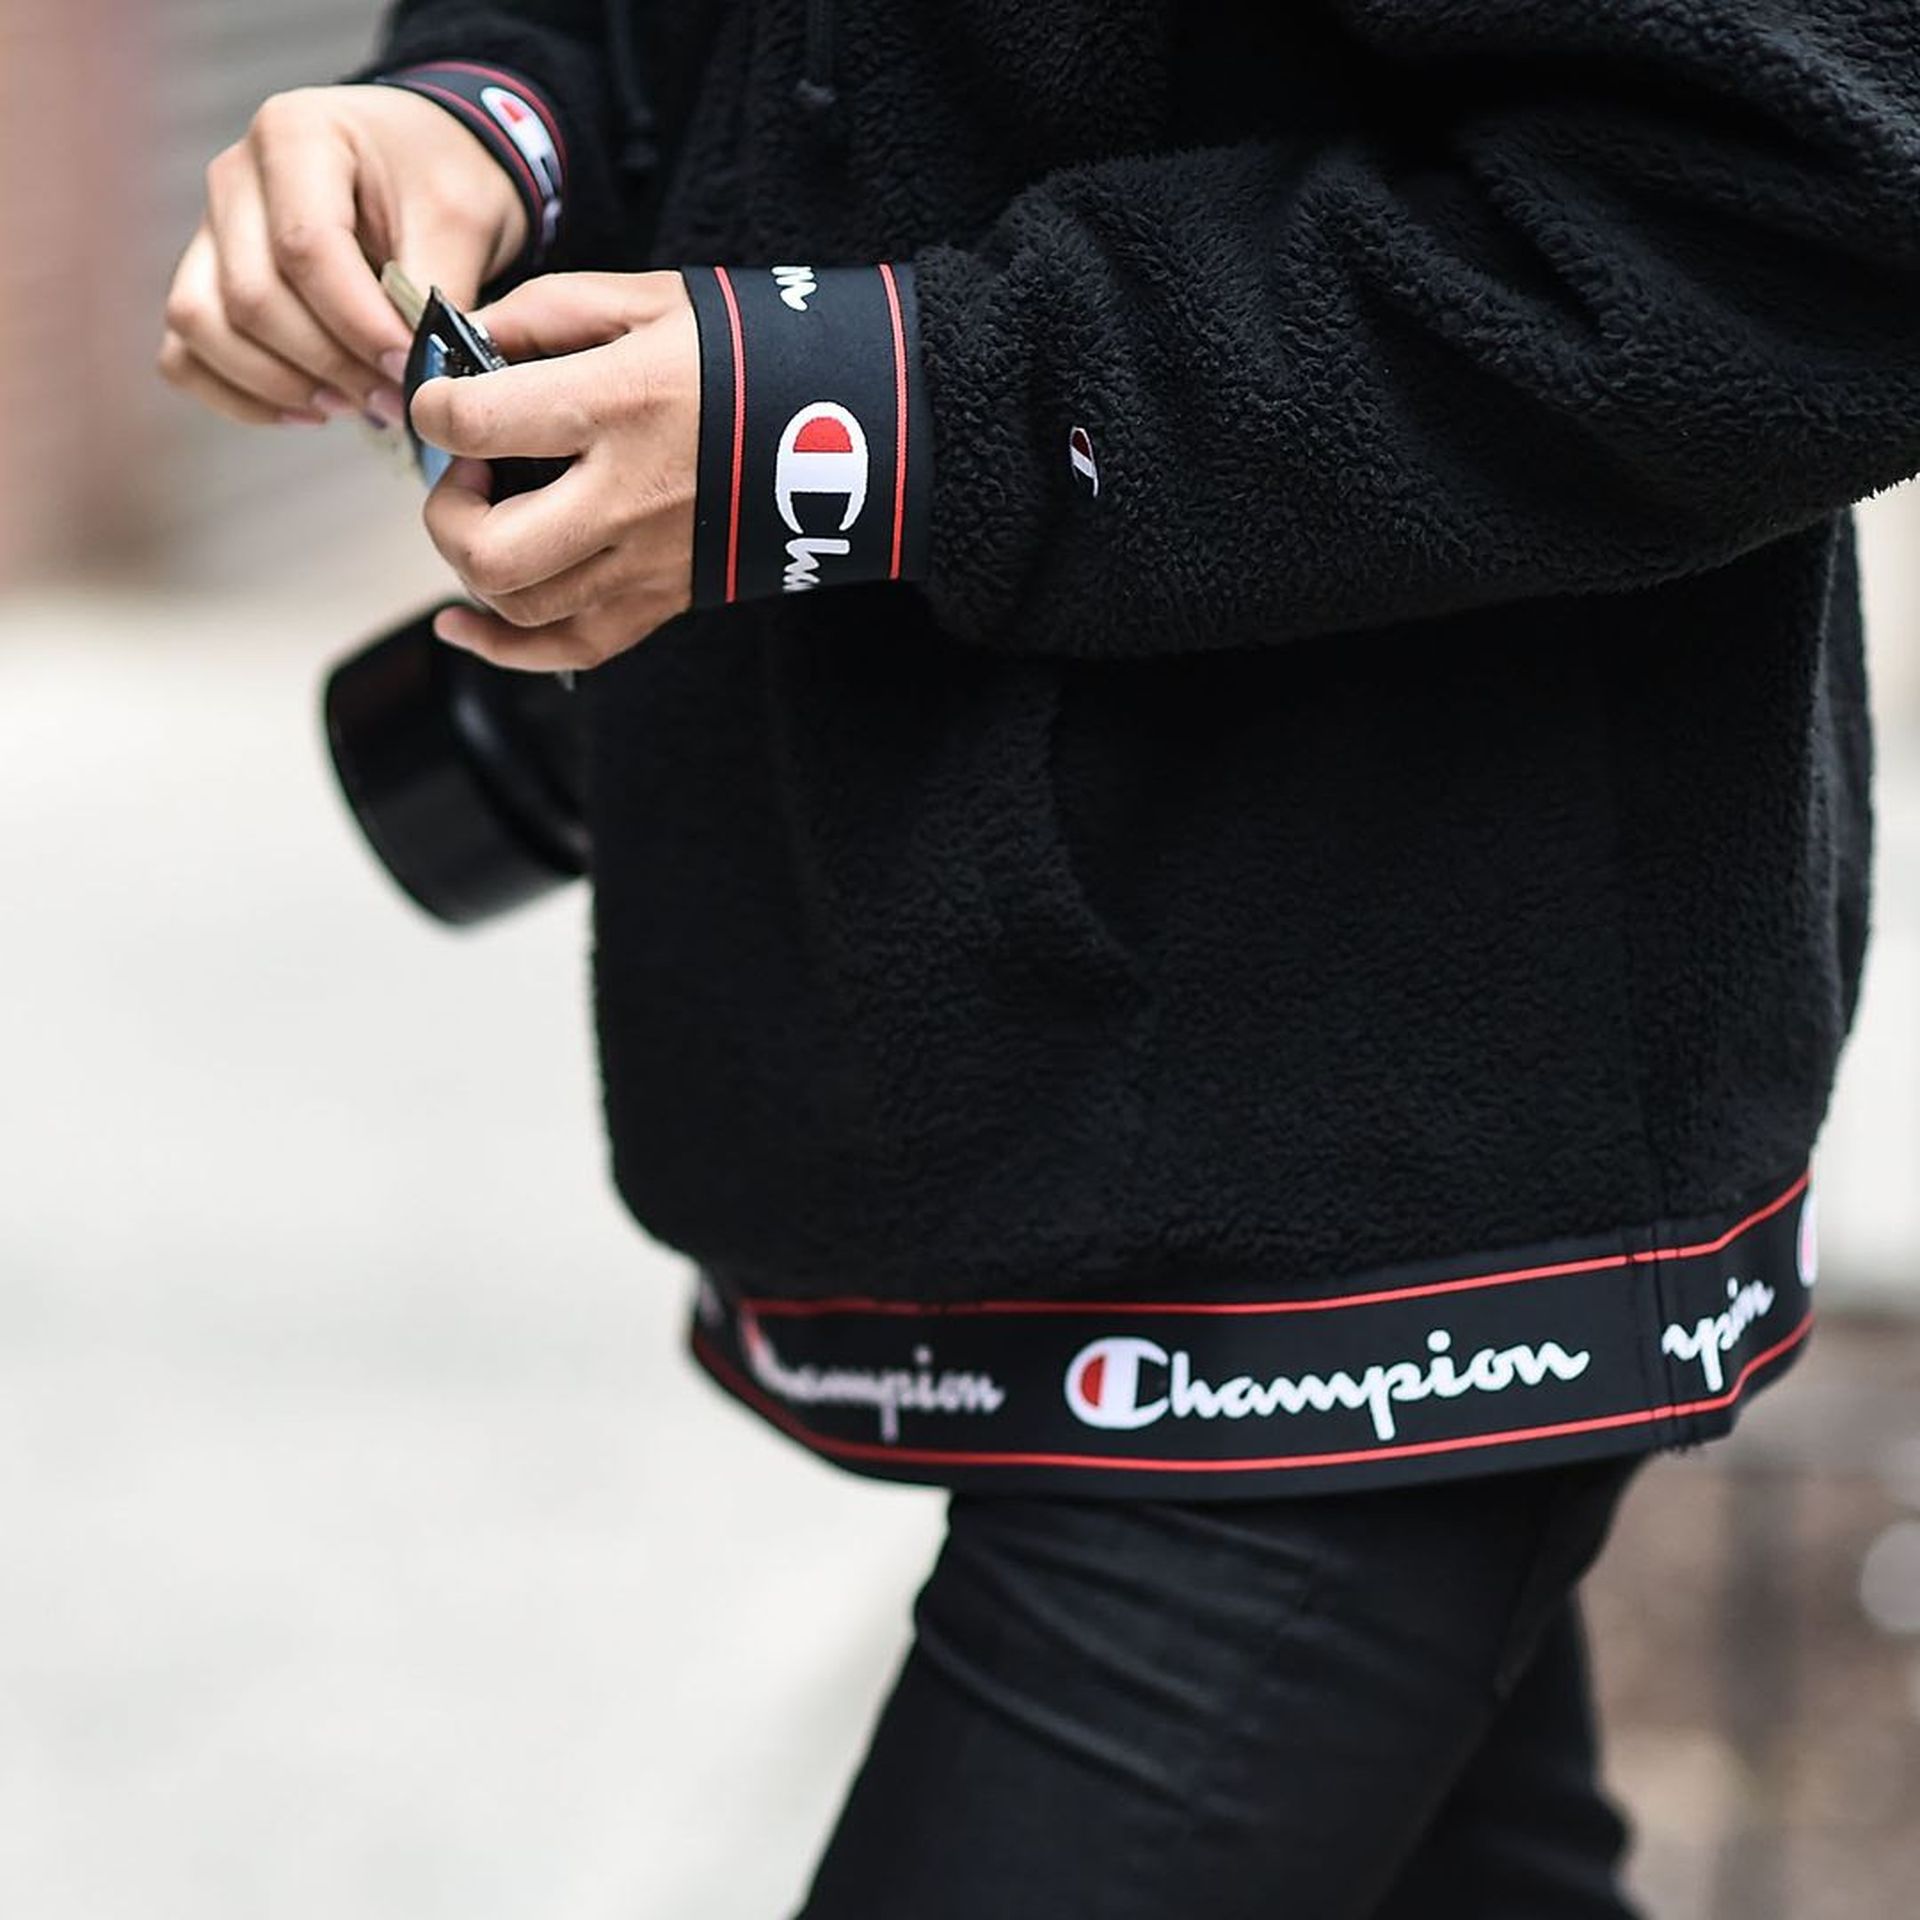 The Instagram Account Bringing Gucci-Meets-Champion Hoodies and